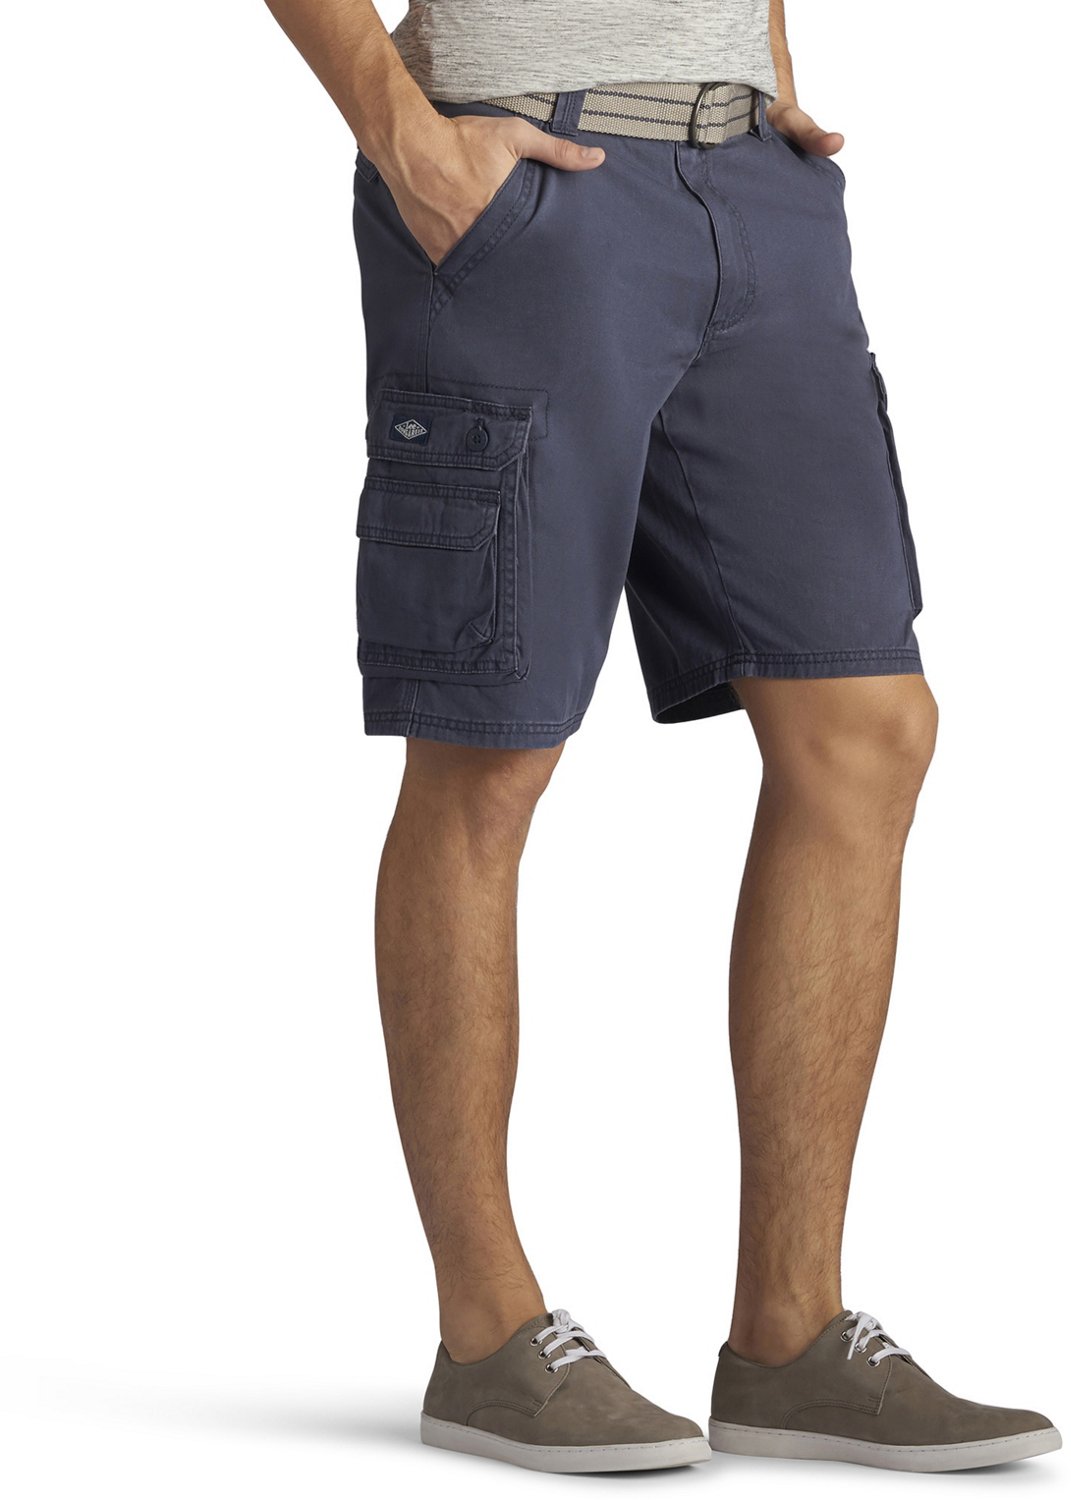 Lee Men's Wyoming Cargo Shorts | Free Shipping at Academy